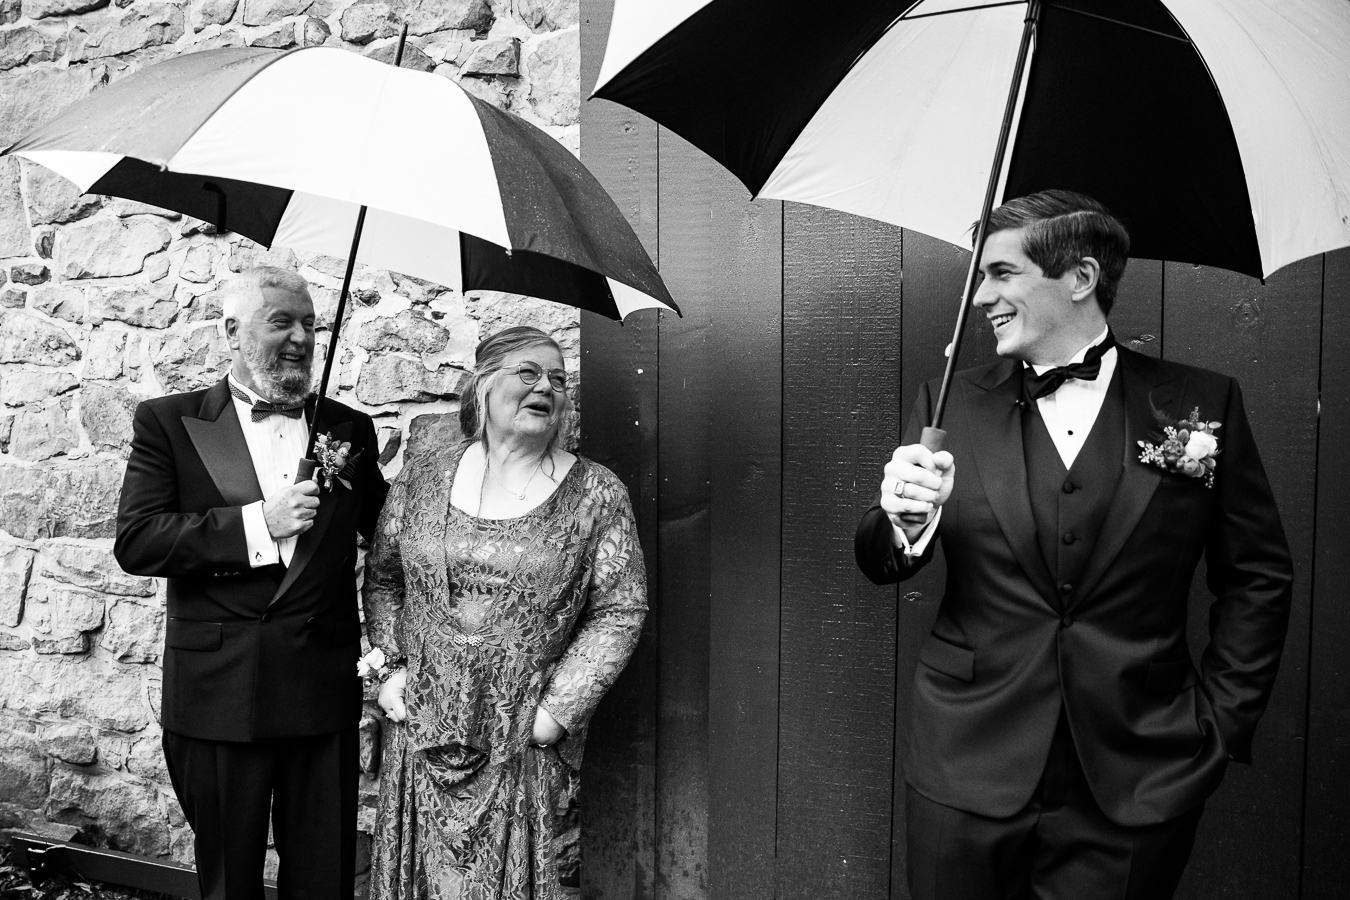 Elizabeth Furnace Wedding photograher, Lisa Rhinehart, captures this black and white candid image of the groom and parents as they stand outside of the ceremony barn with umbrellas over their heads to stay out of the rain 